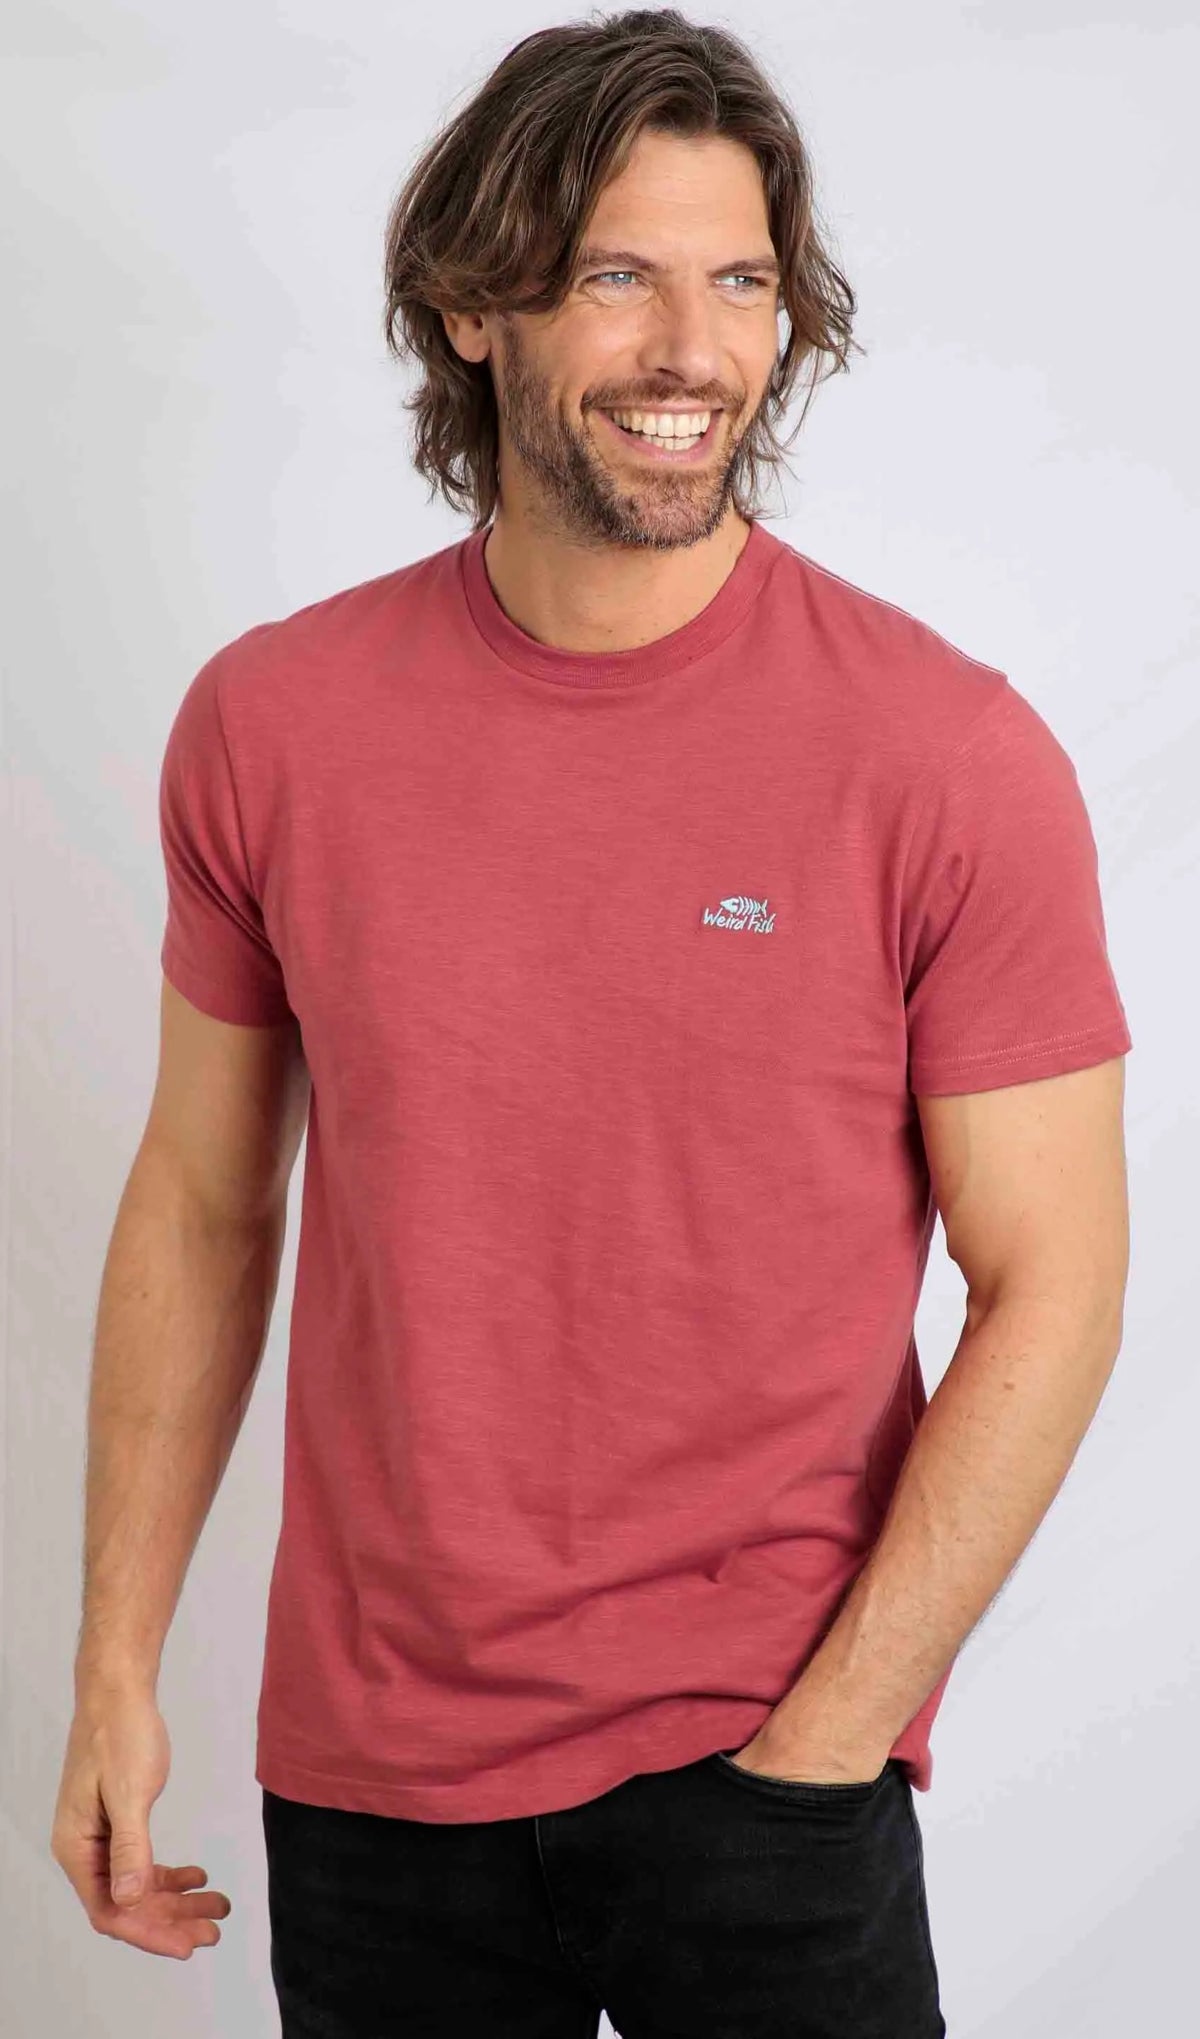 Weird Fish men's short sleeve Fished t-shirt in Rosewood.